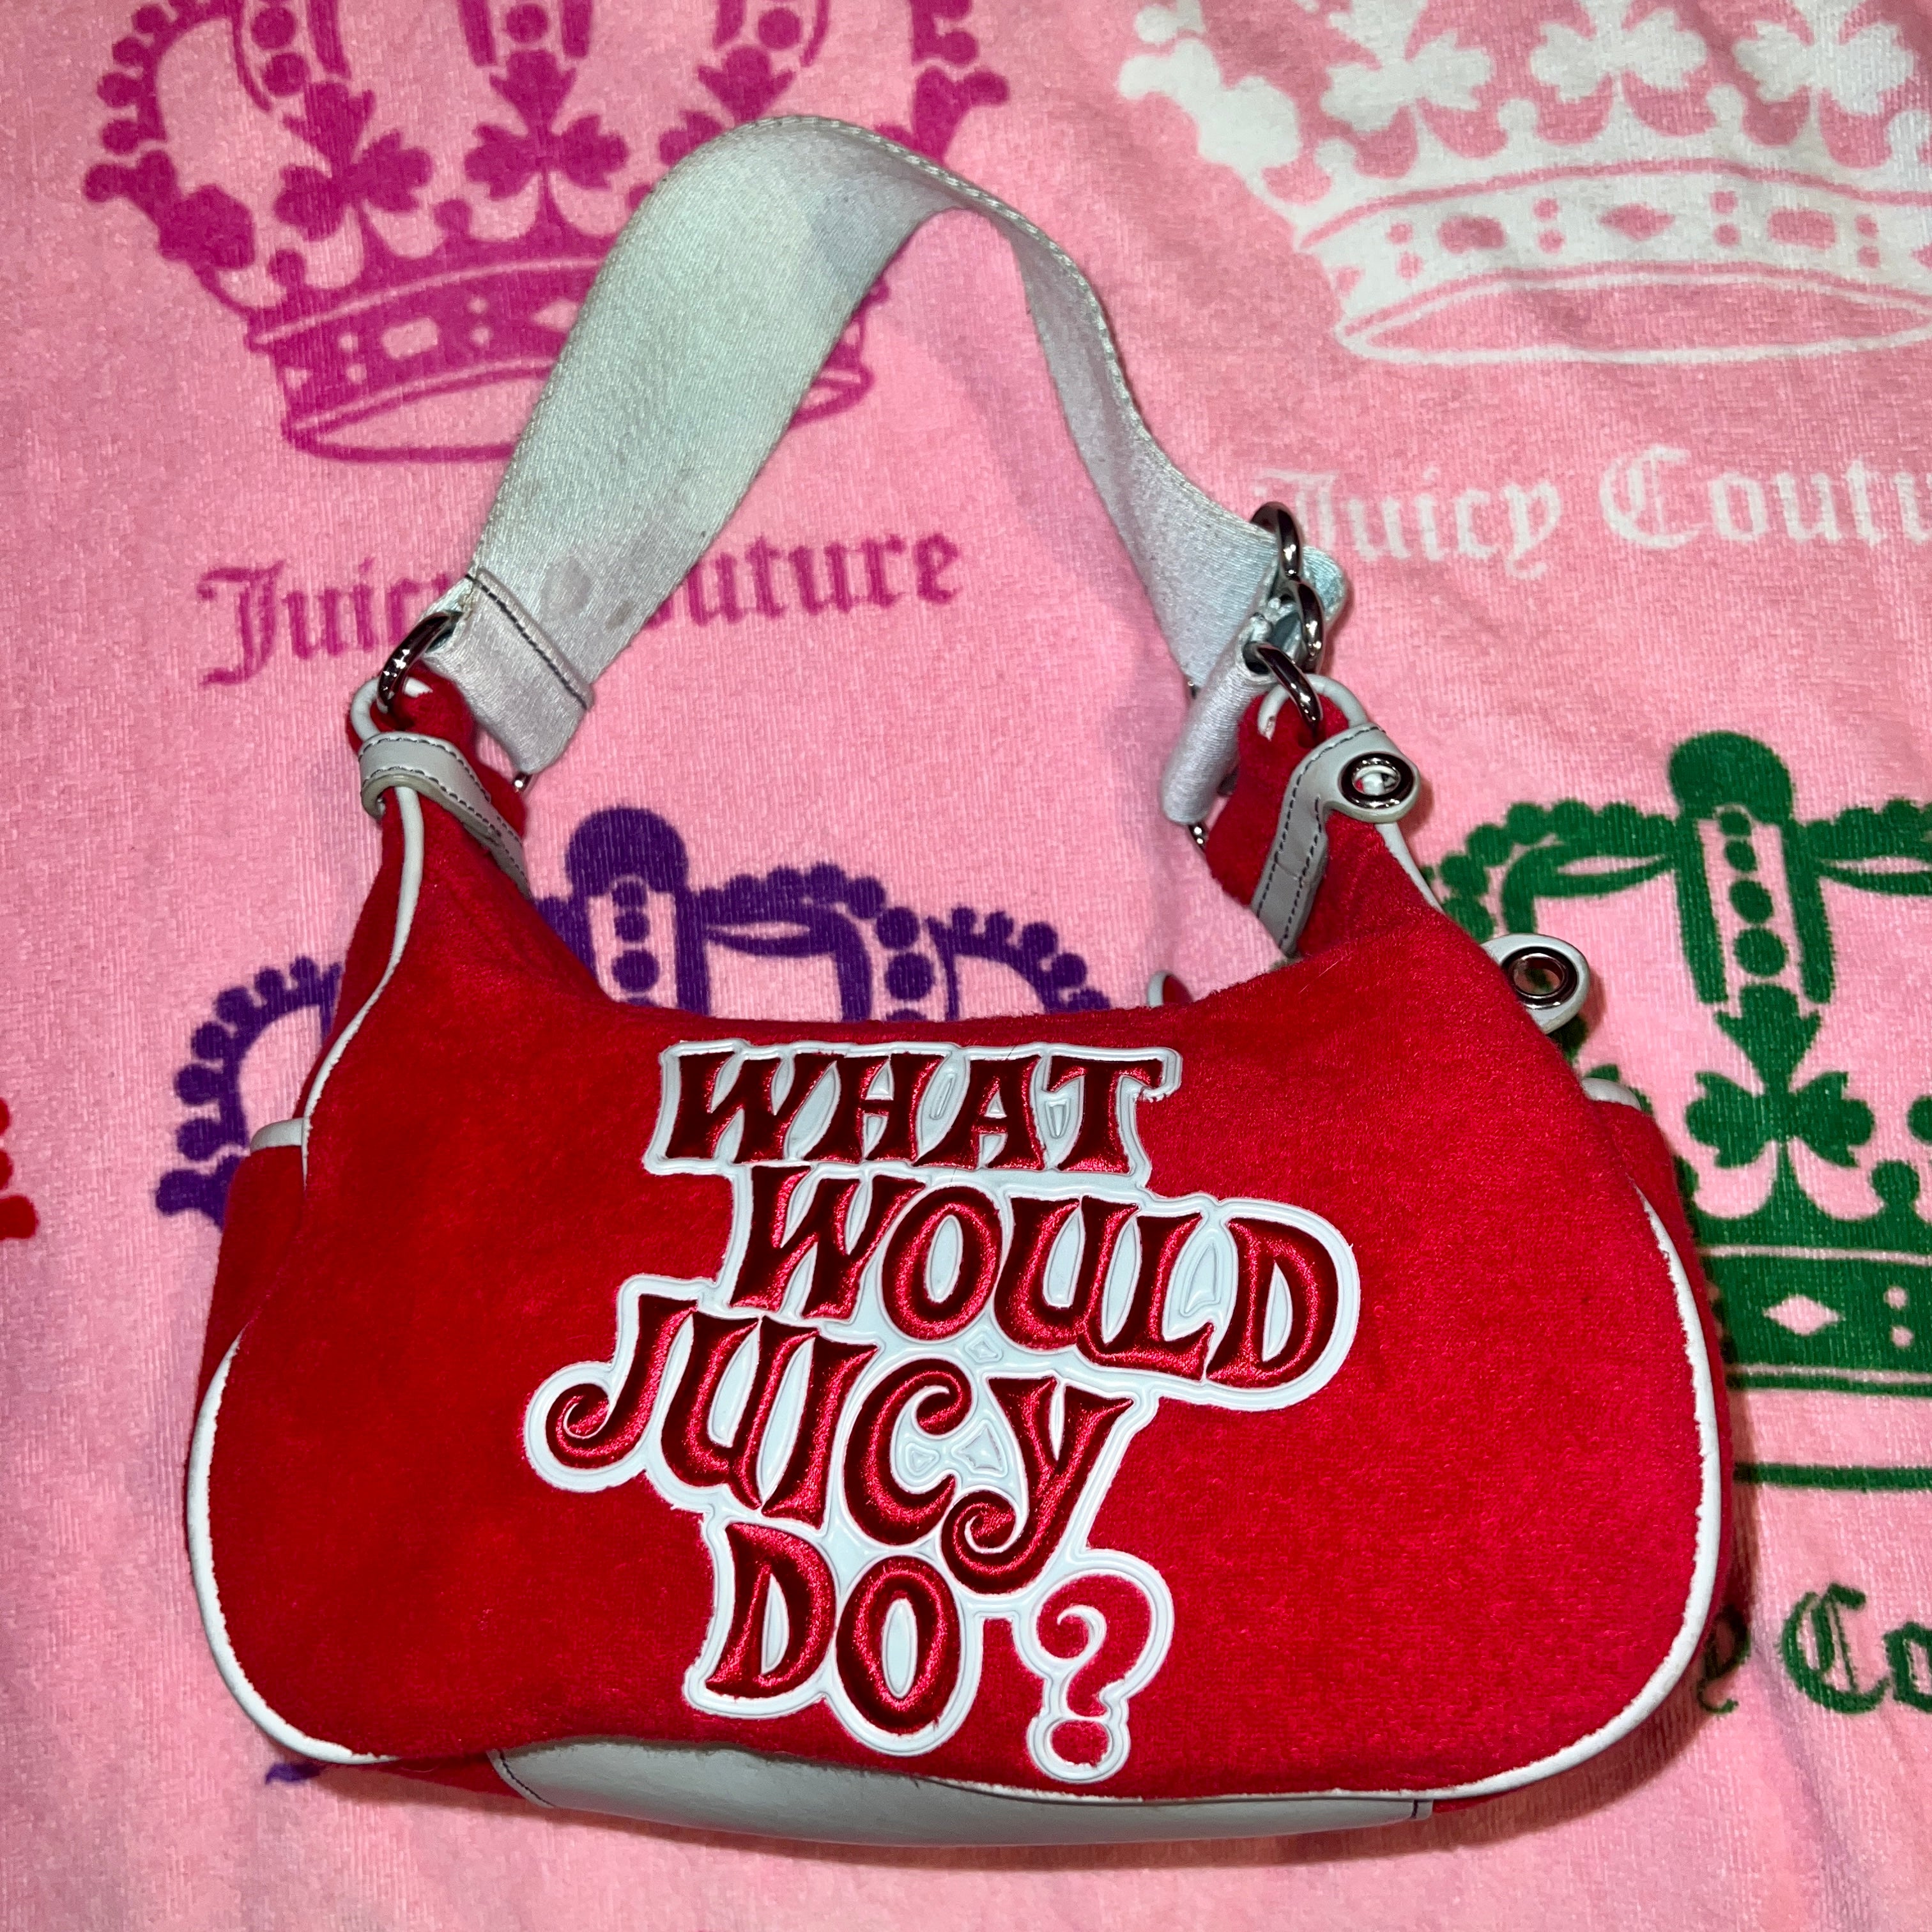 Sell Your Vintage Juicy Couture Handbags And Purses | Vintage Cash Cow